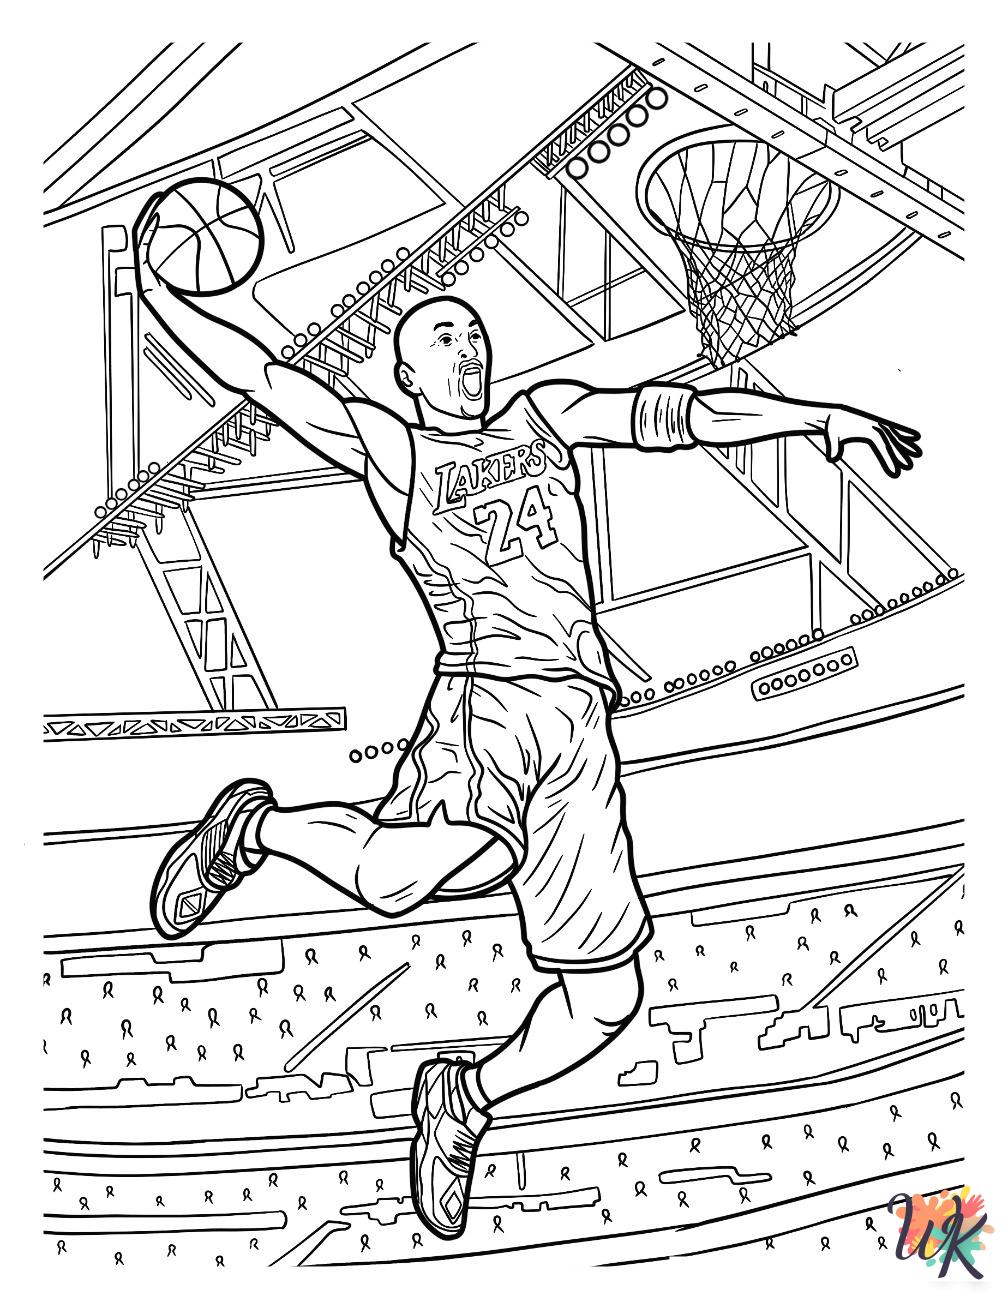 Kobe Bryant adult coloring pages